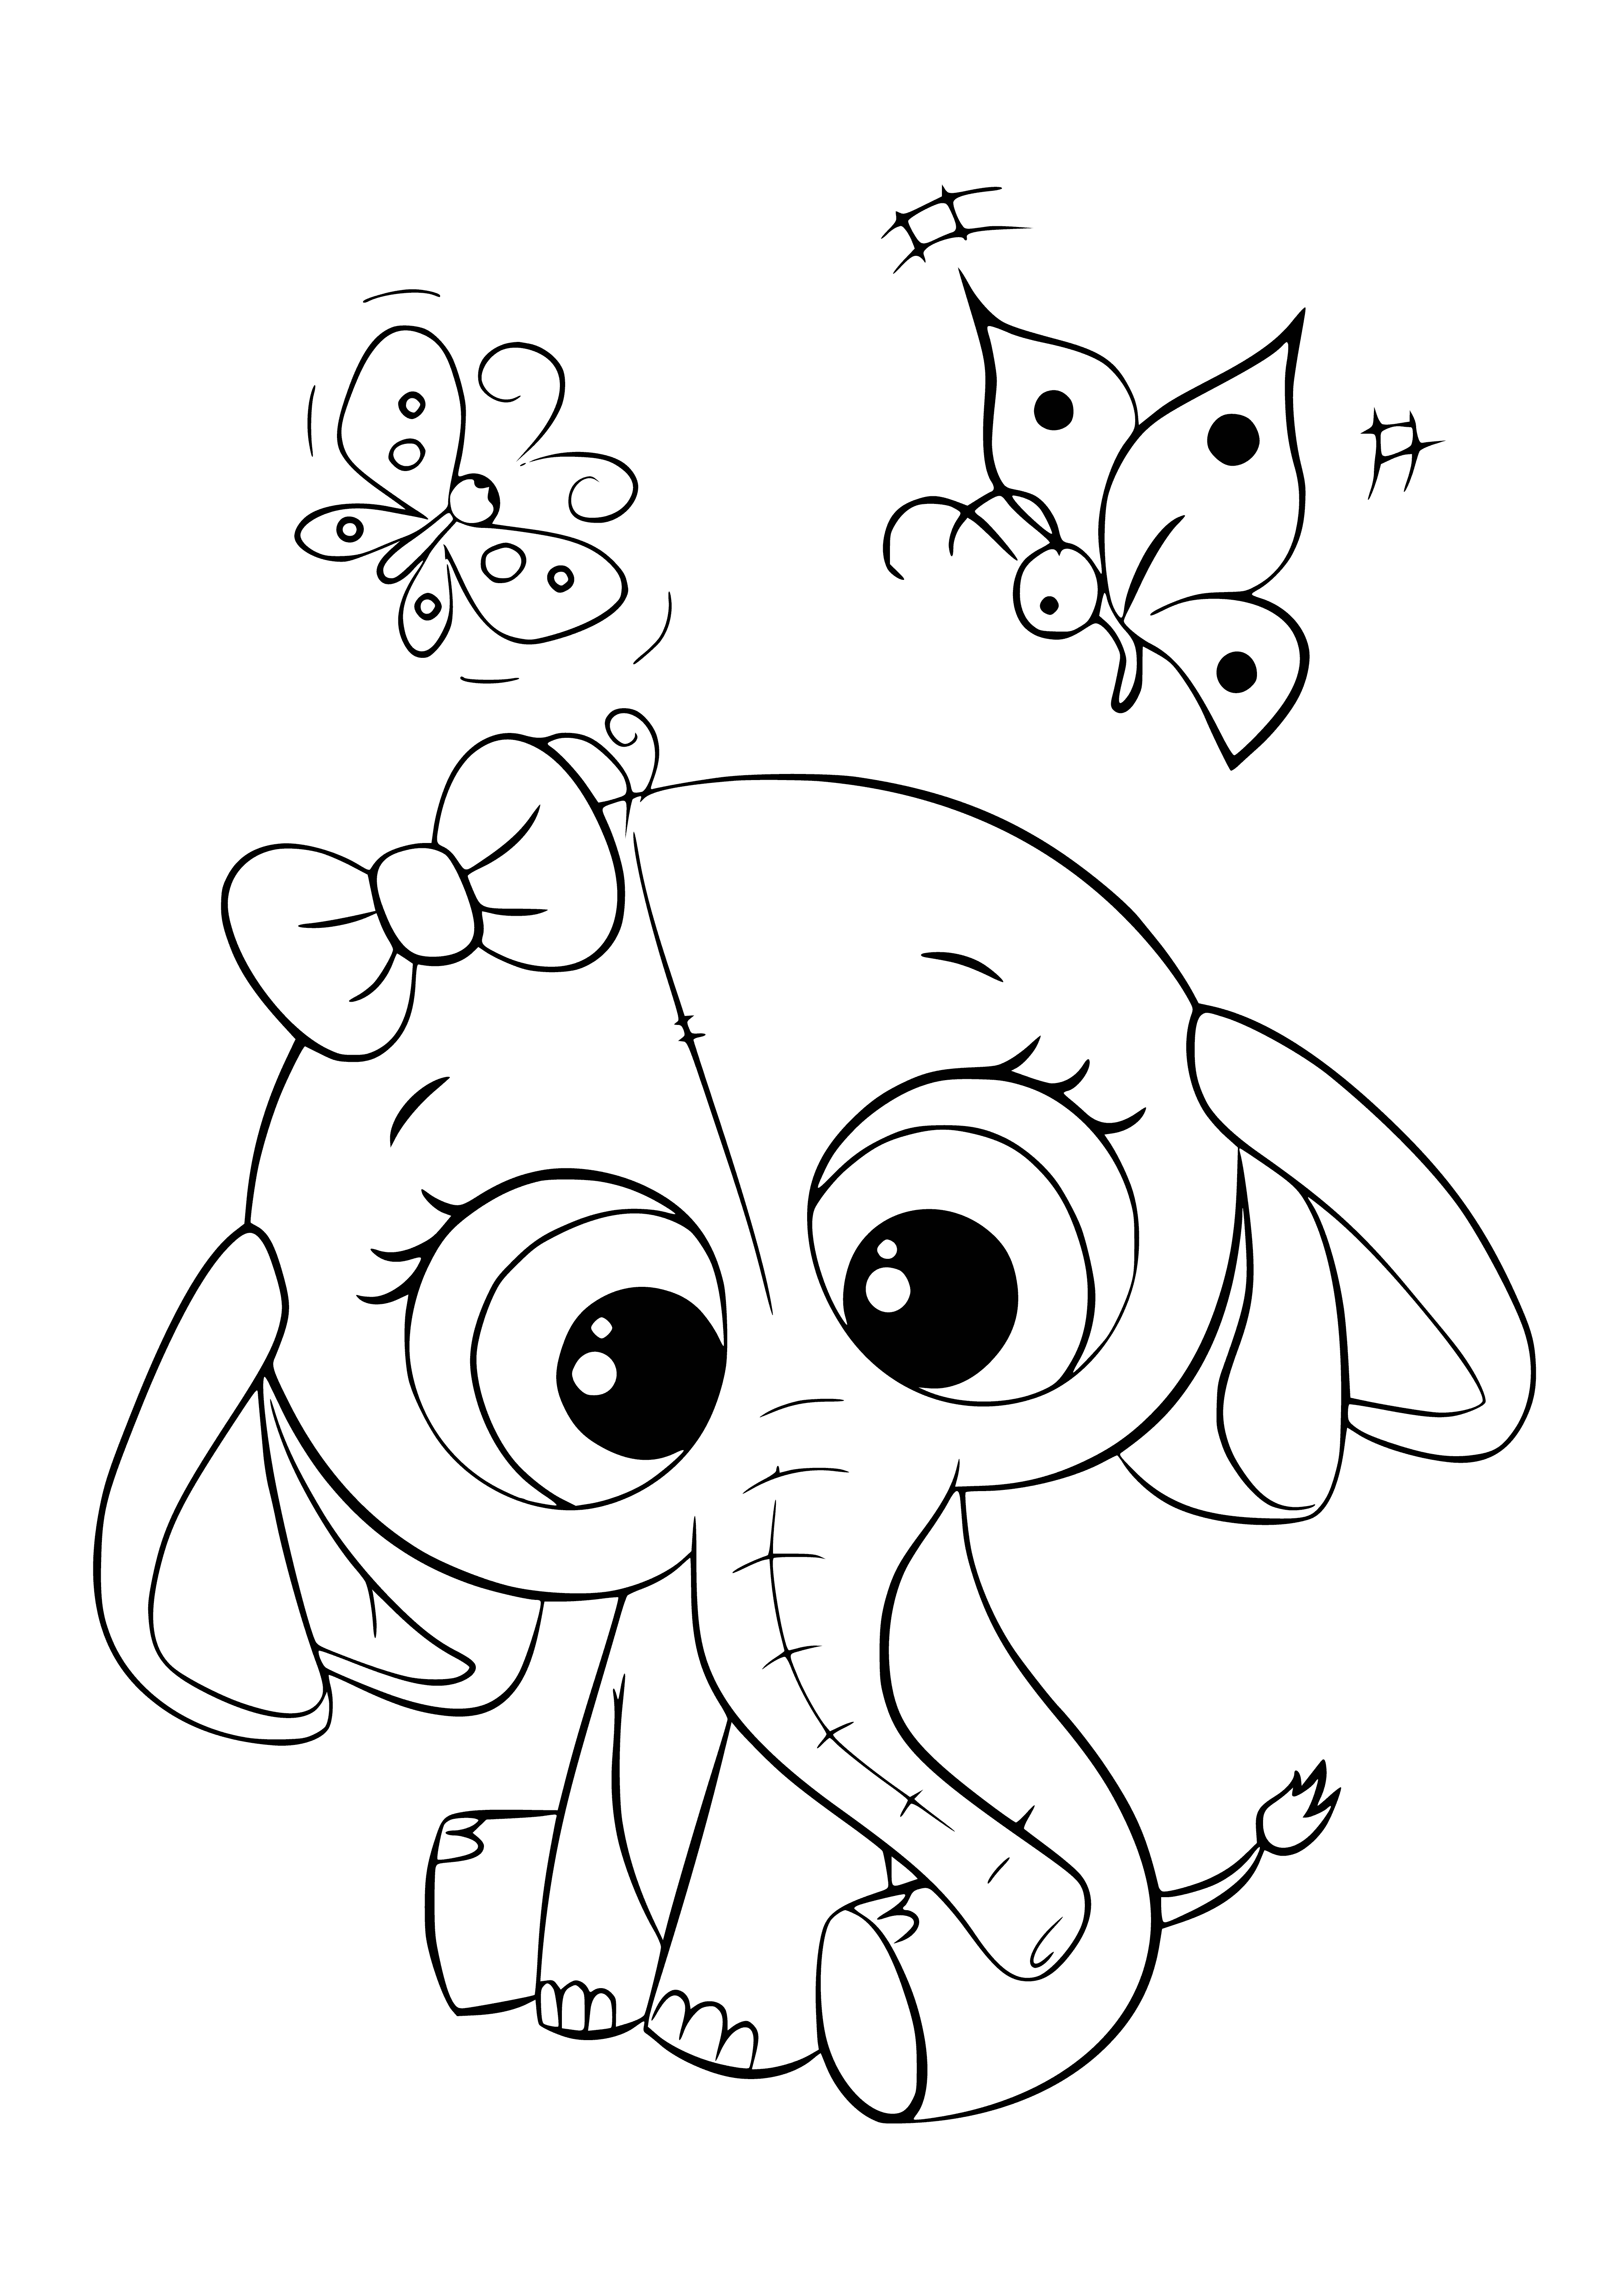 coloring page: Cute coloring pages of a baby elephant & babachki, gray & pink respectively, with big ears & trunks & white stomachs! #coloringpages